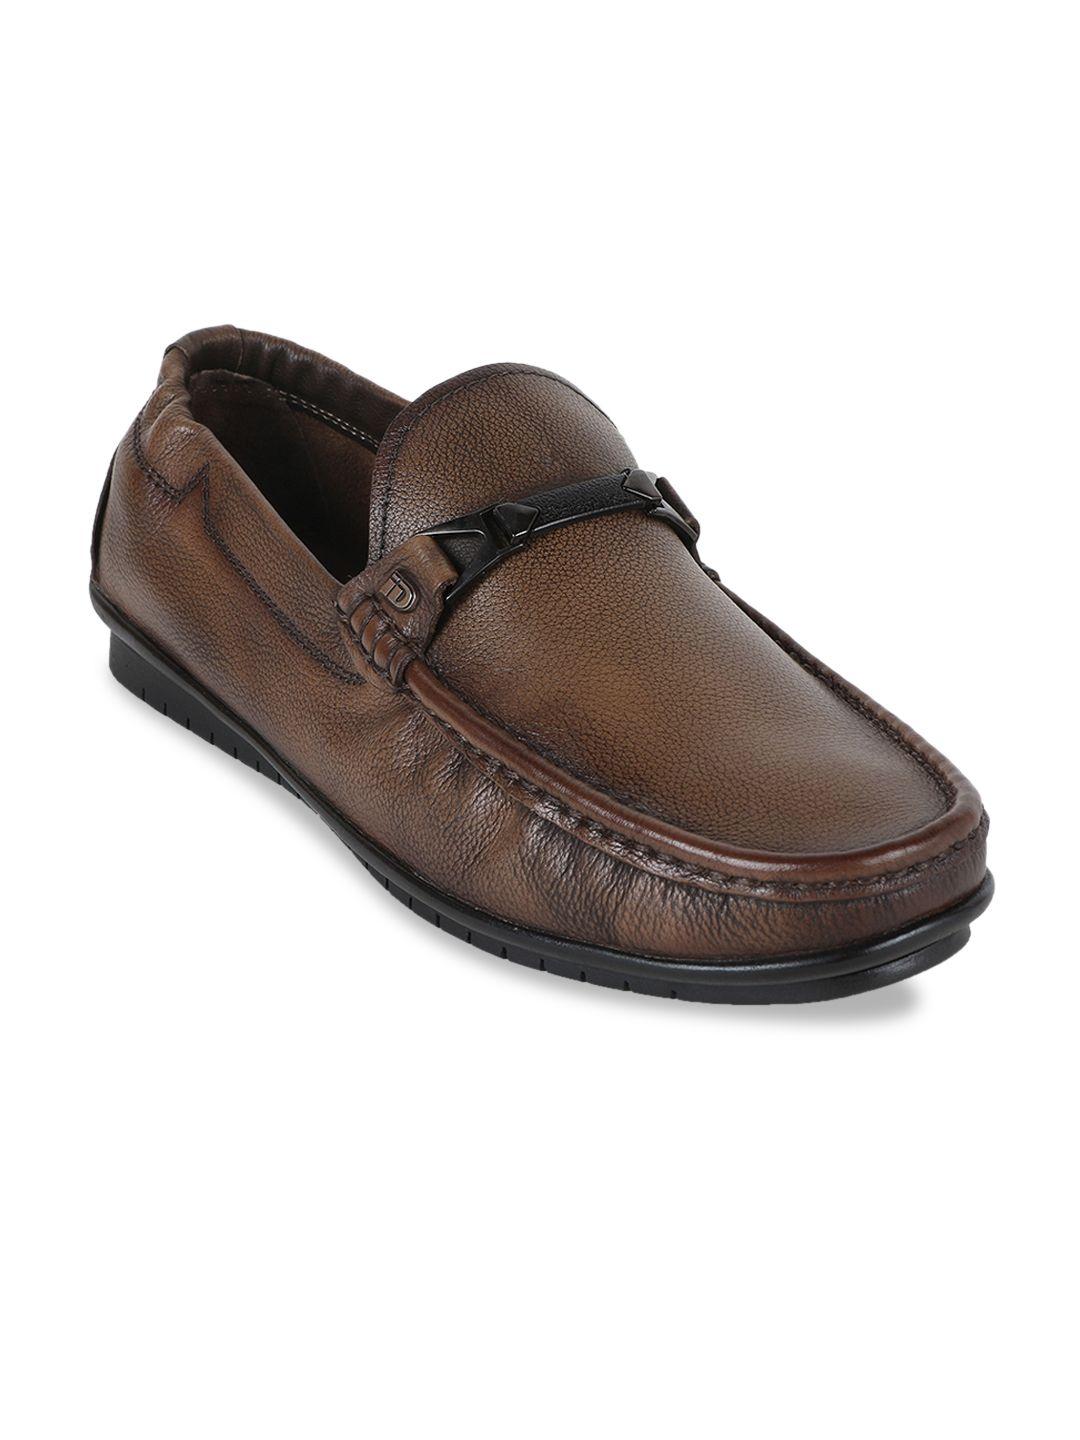 id men tan brown leather loafers